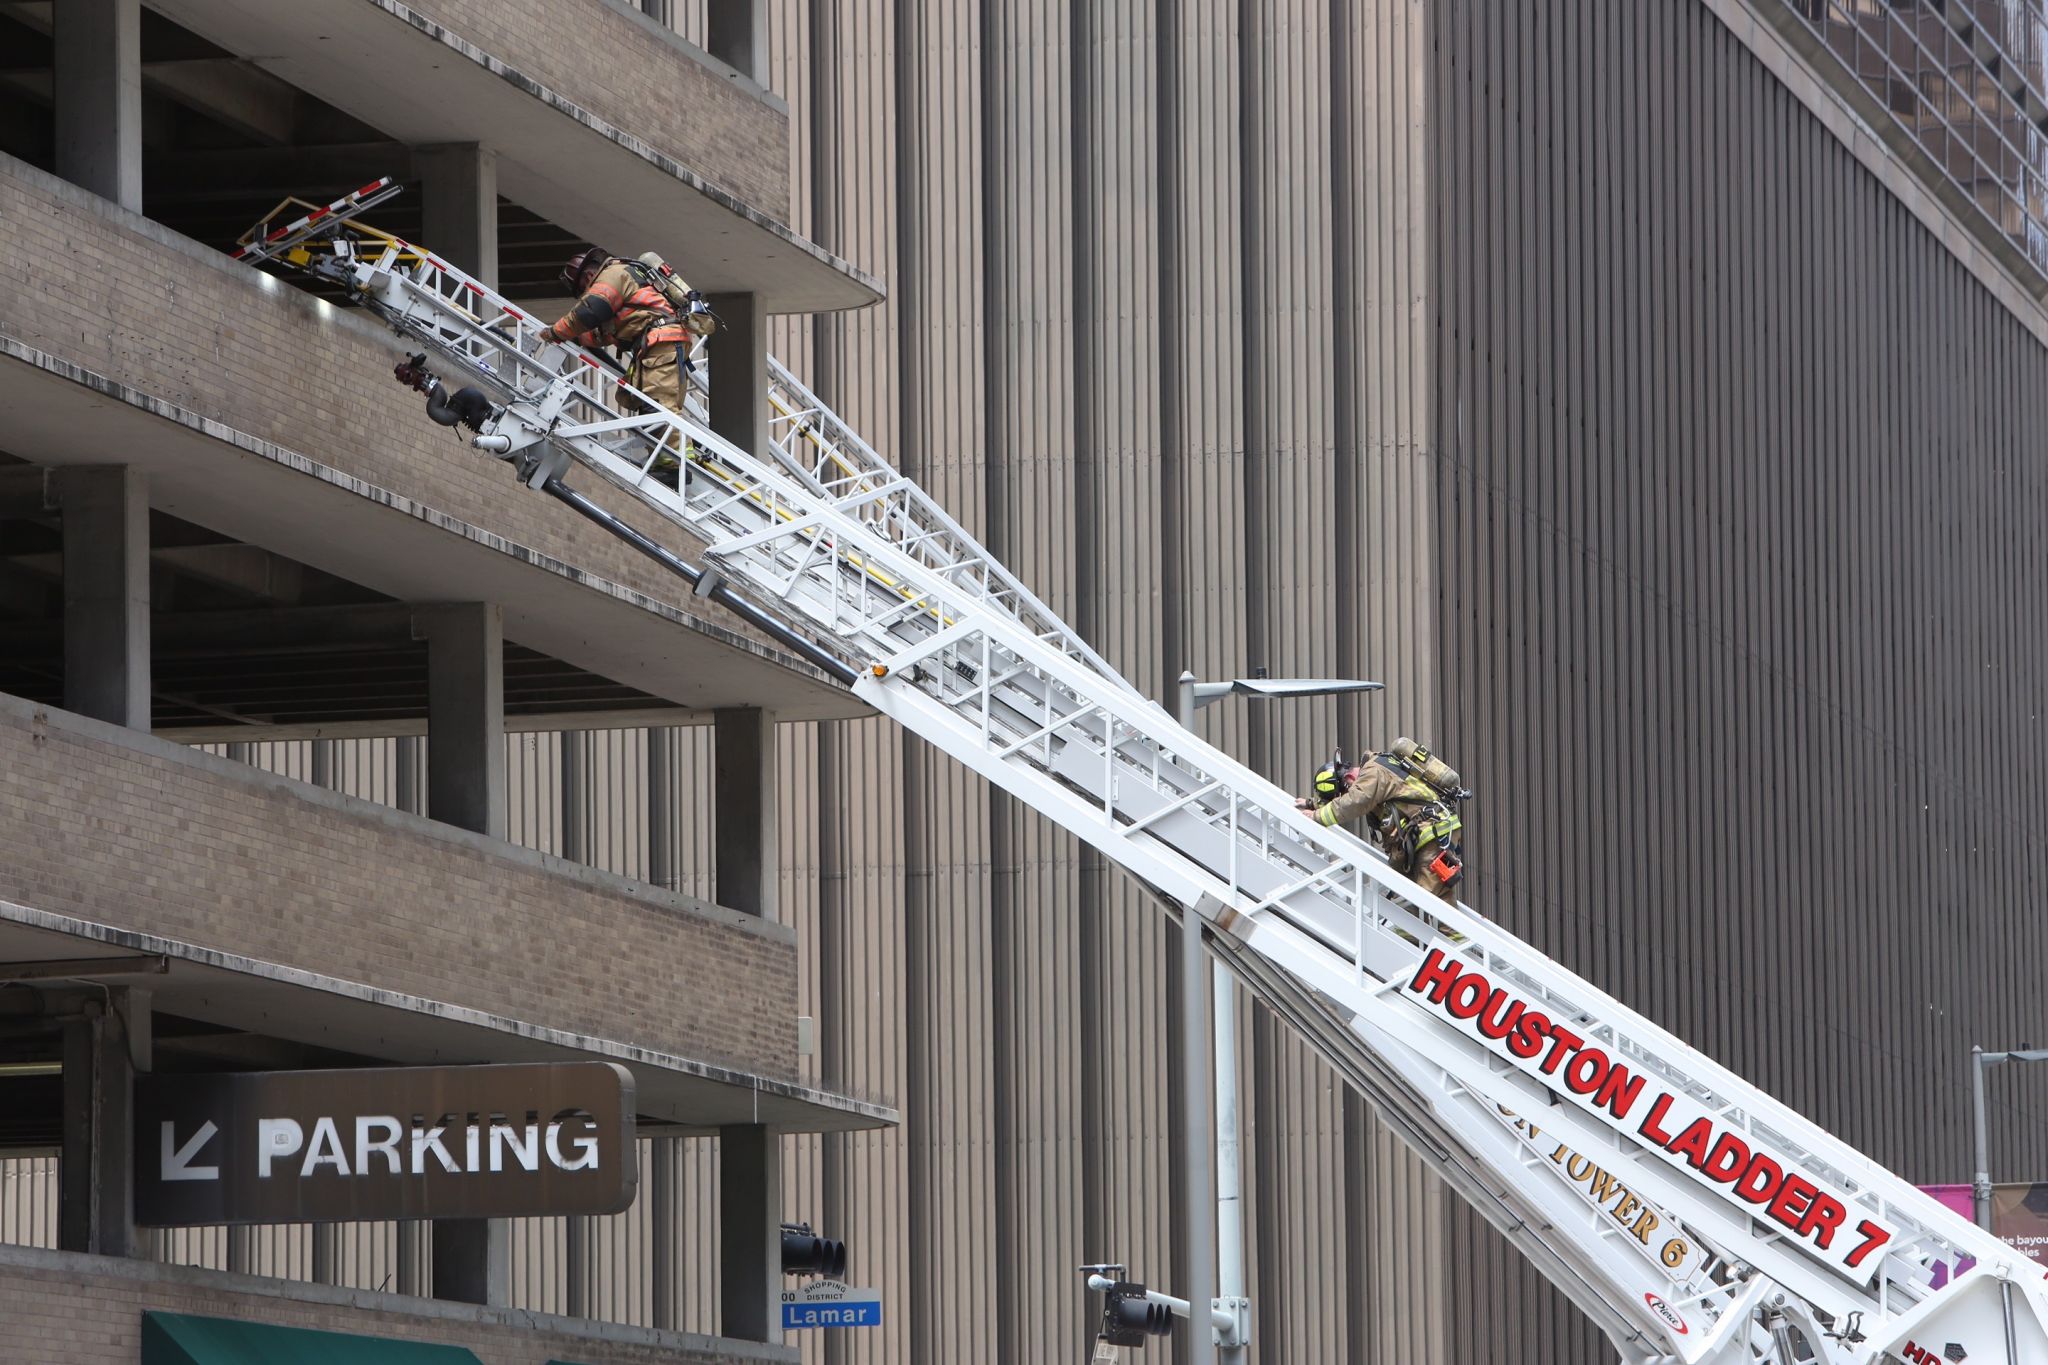 Fire erupts in downtown Houston parking garage - Houston Chronicle